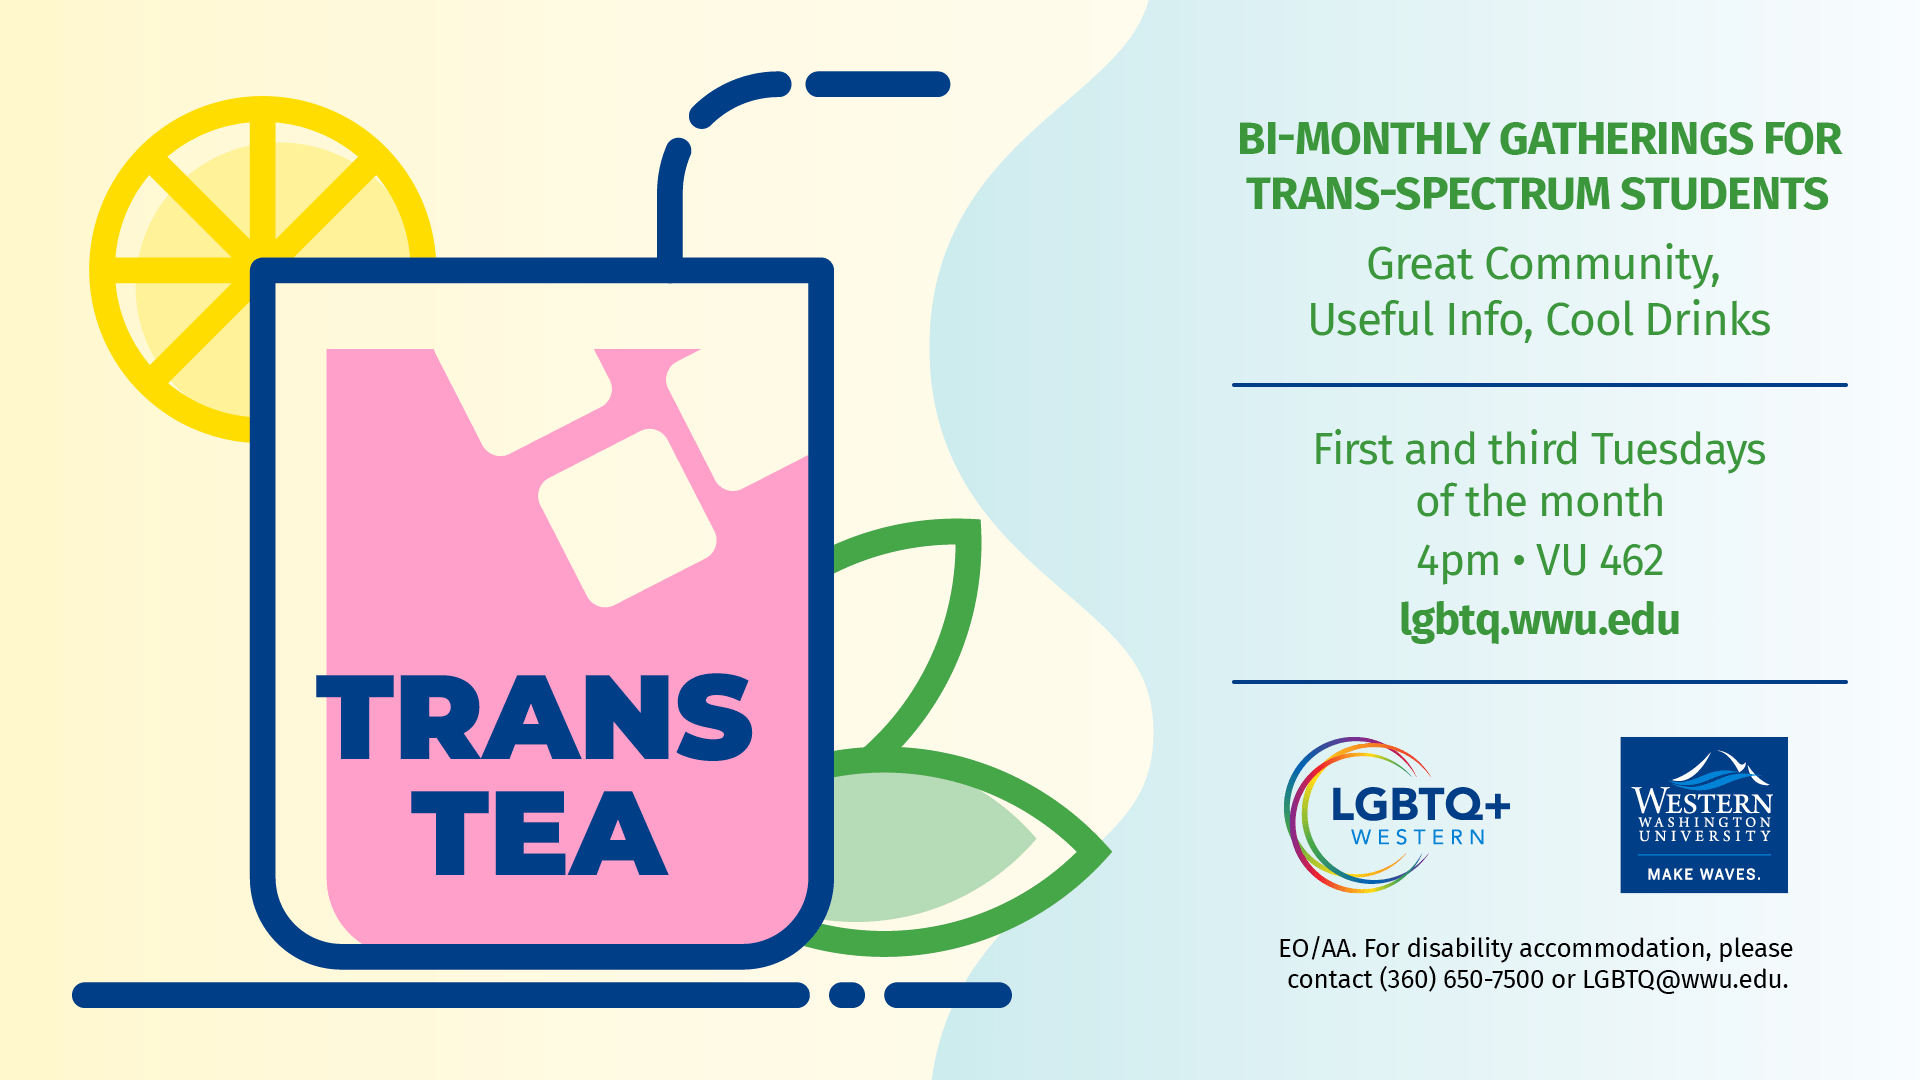 Illustration of a cup with a straw and a lemon wedge holding pink tea with ice cubes next to event details for Trans Tea